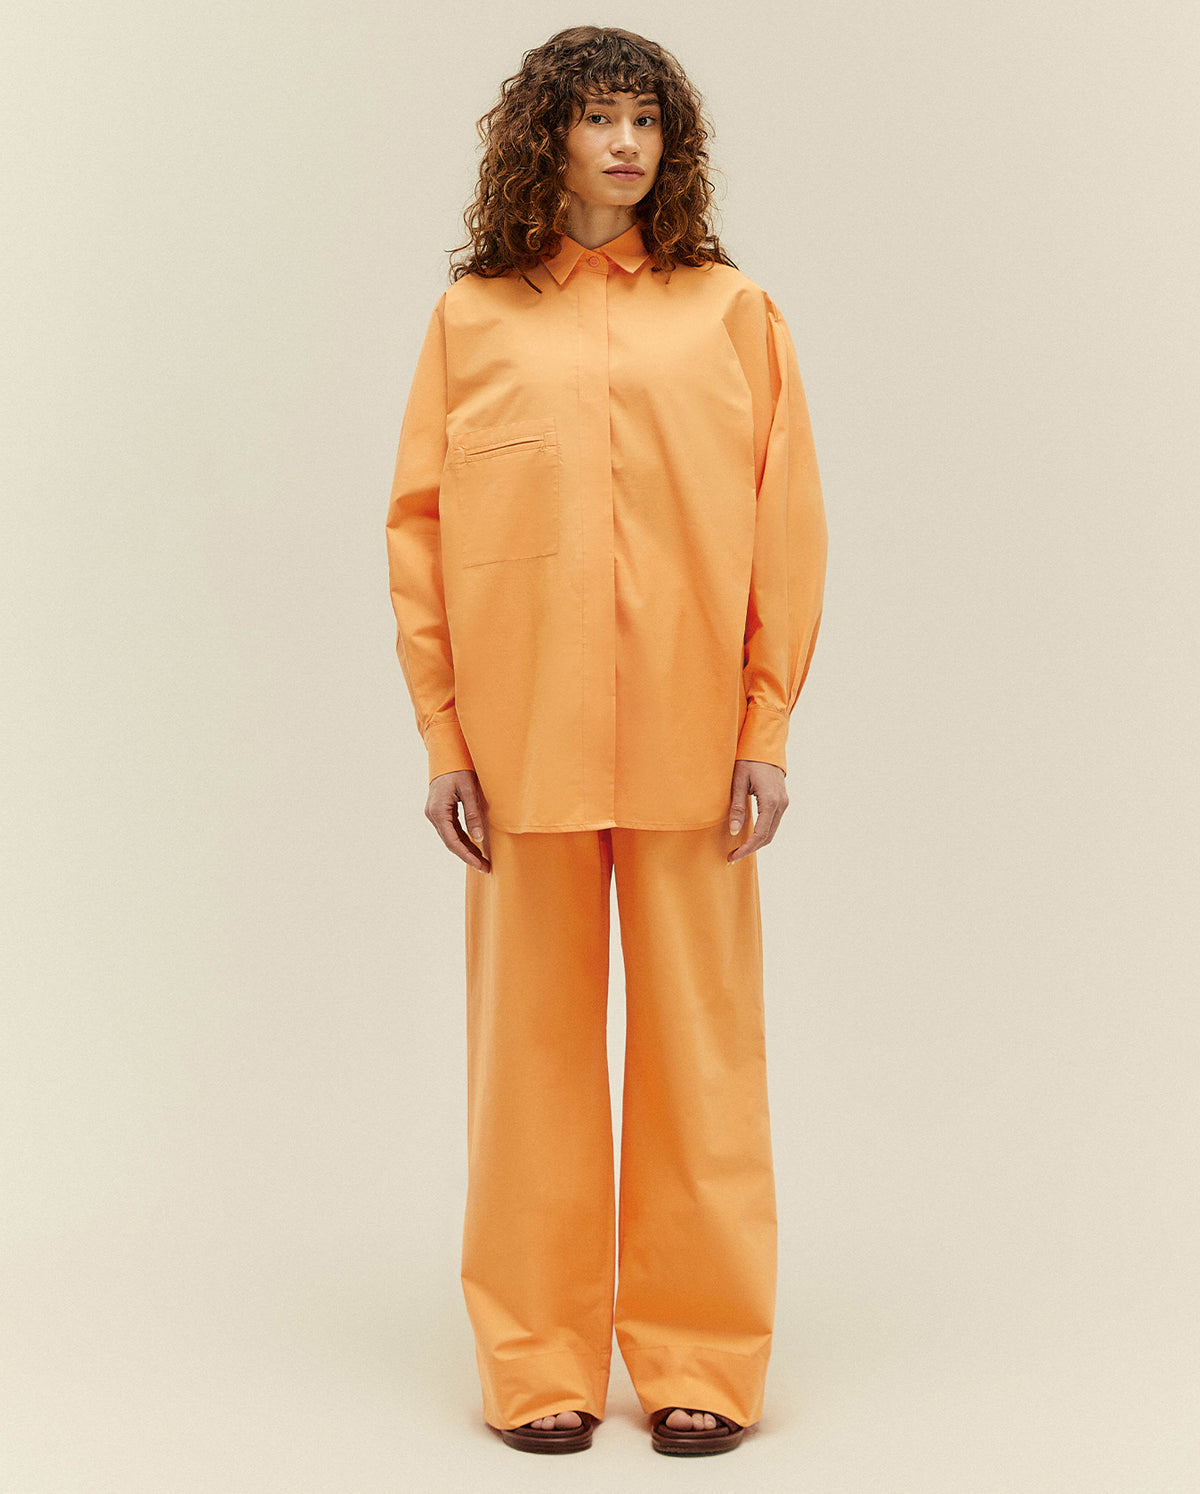 Oversized Shirt In Apricot